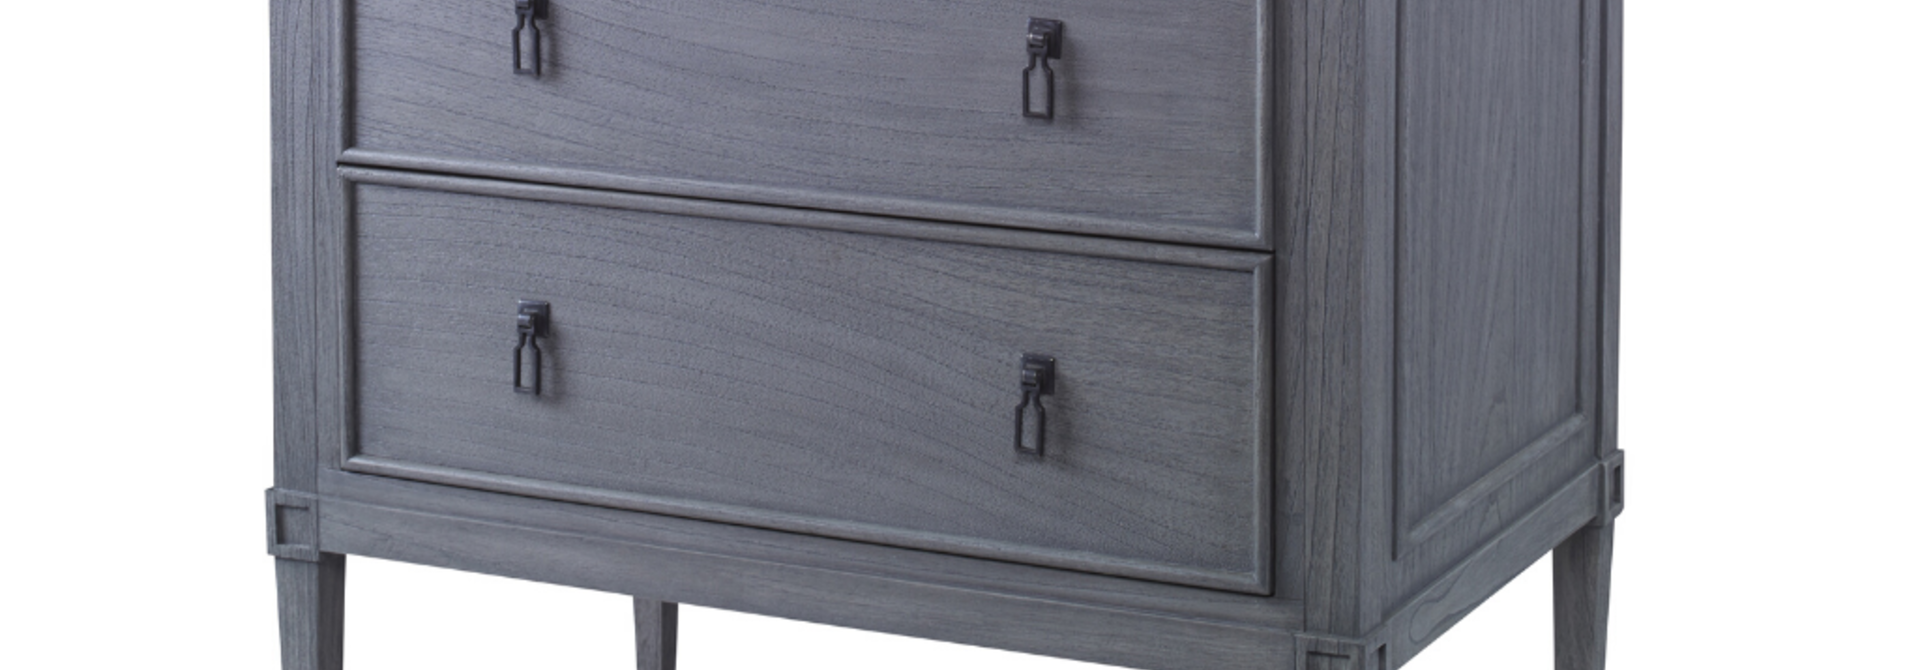 Kensington | The Sink Chest Collection